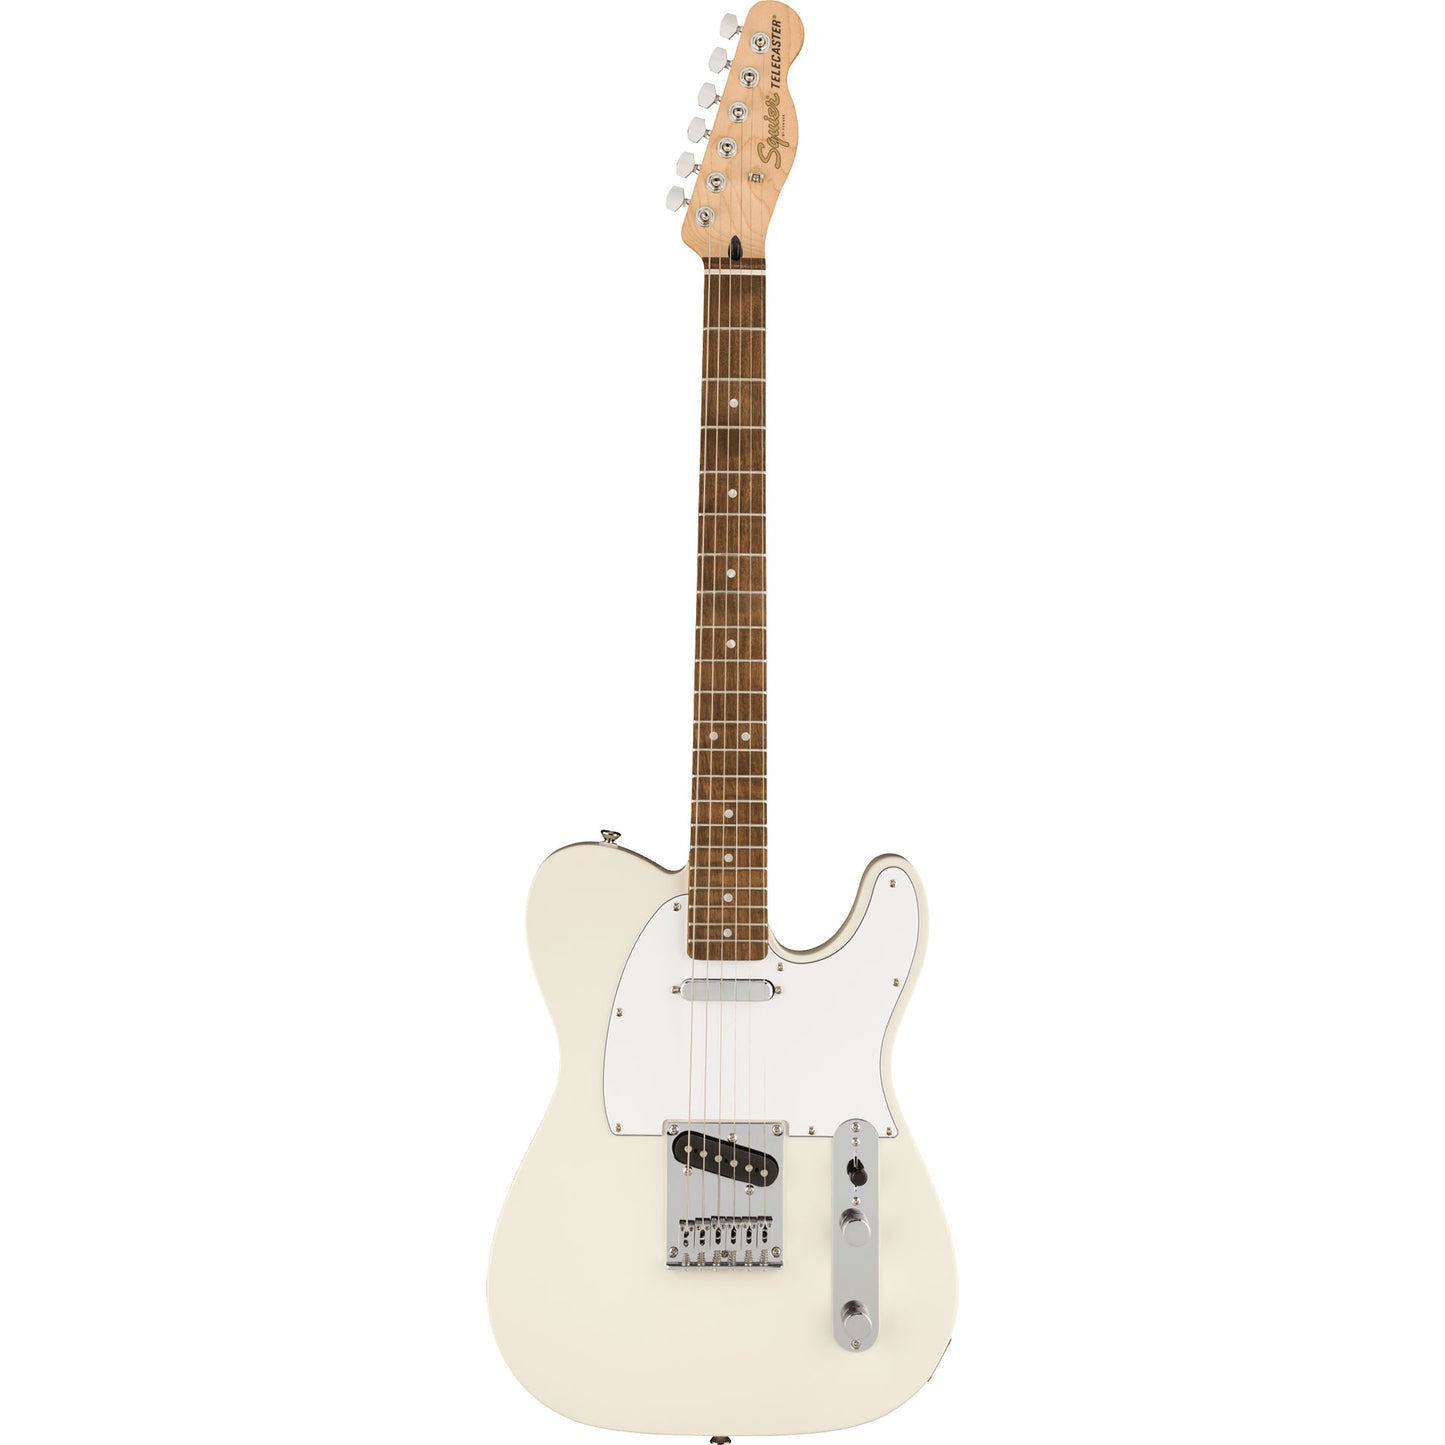 Squier Affinity Series Telecaster in Olympic White